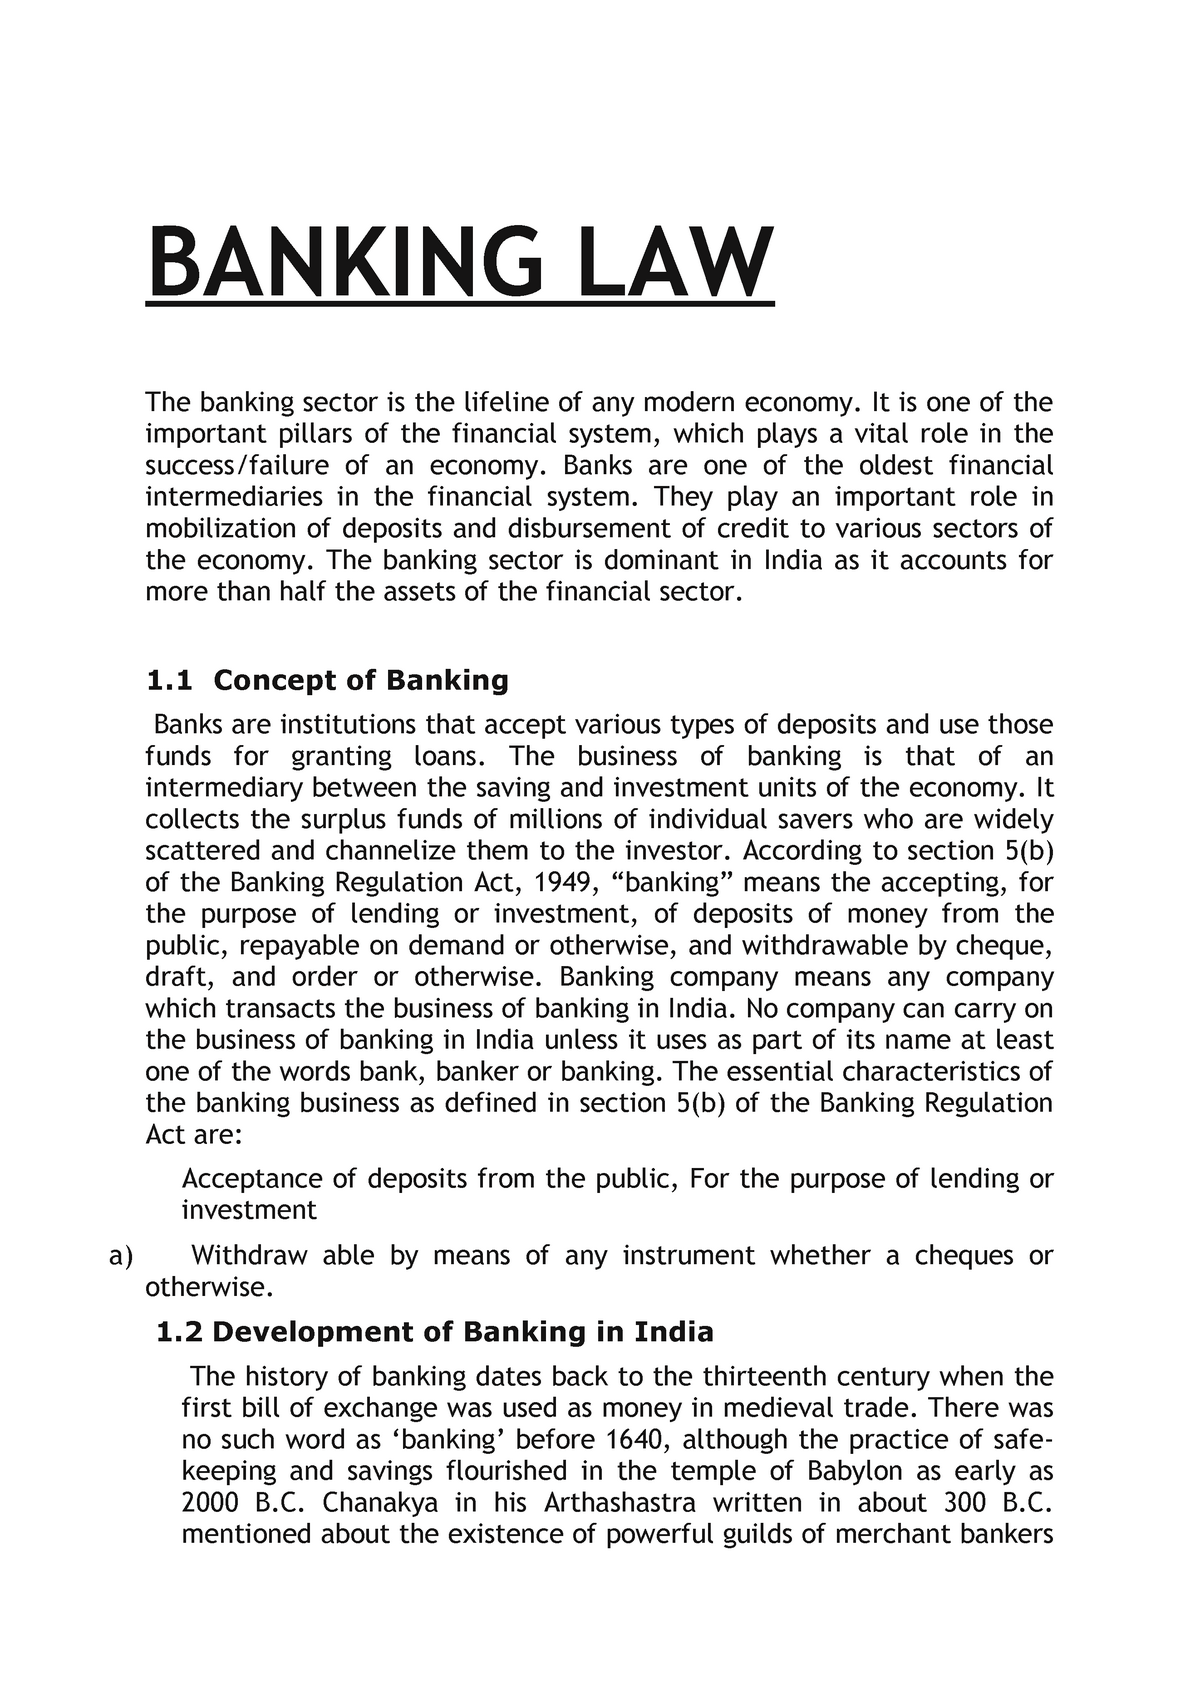 assignment in banking law